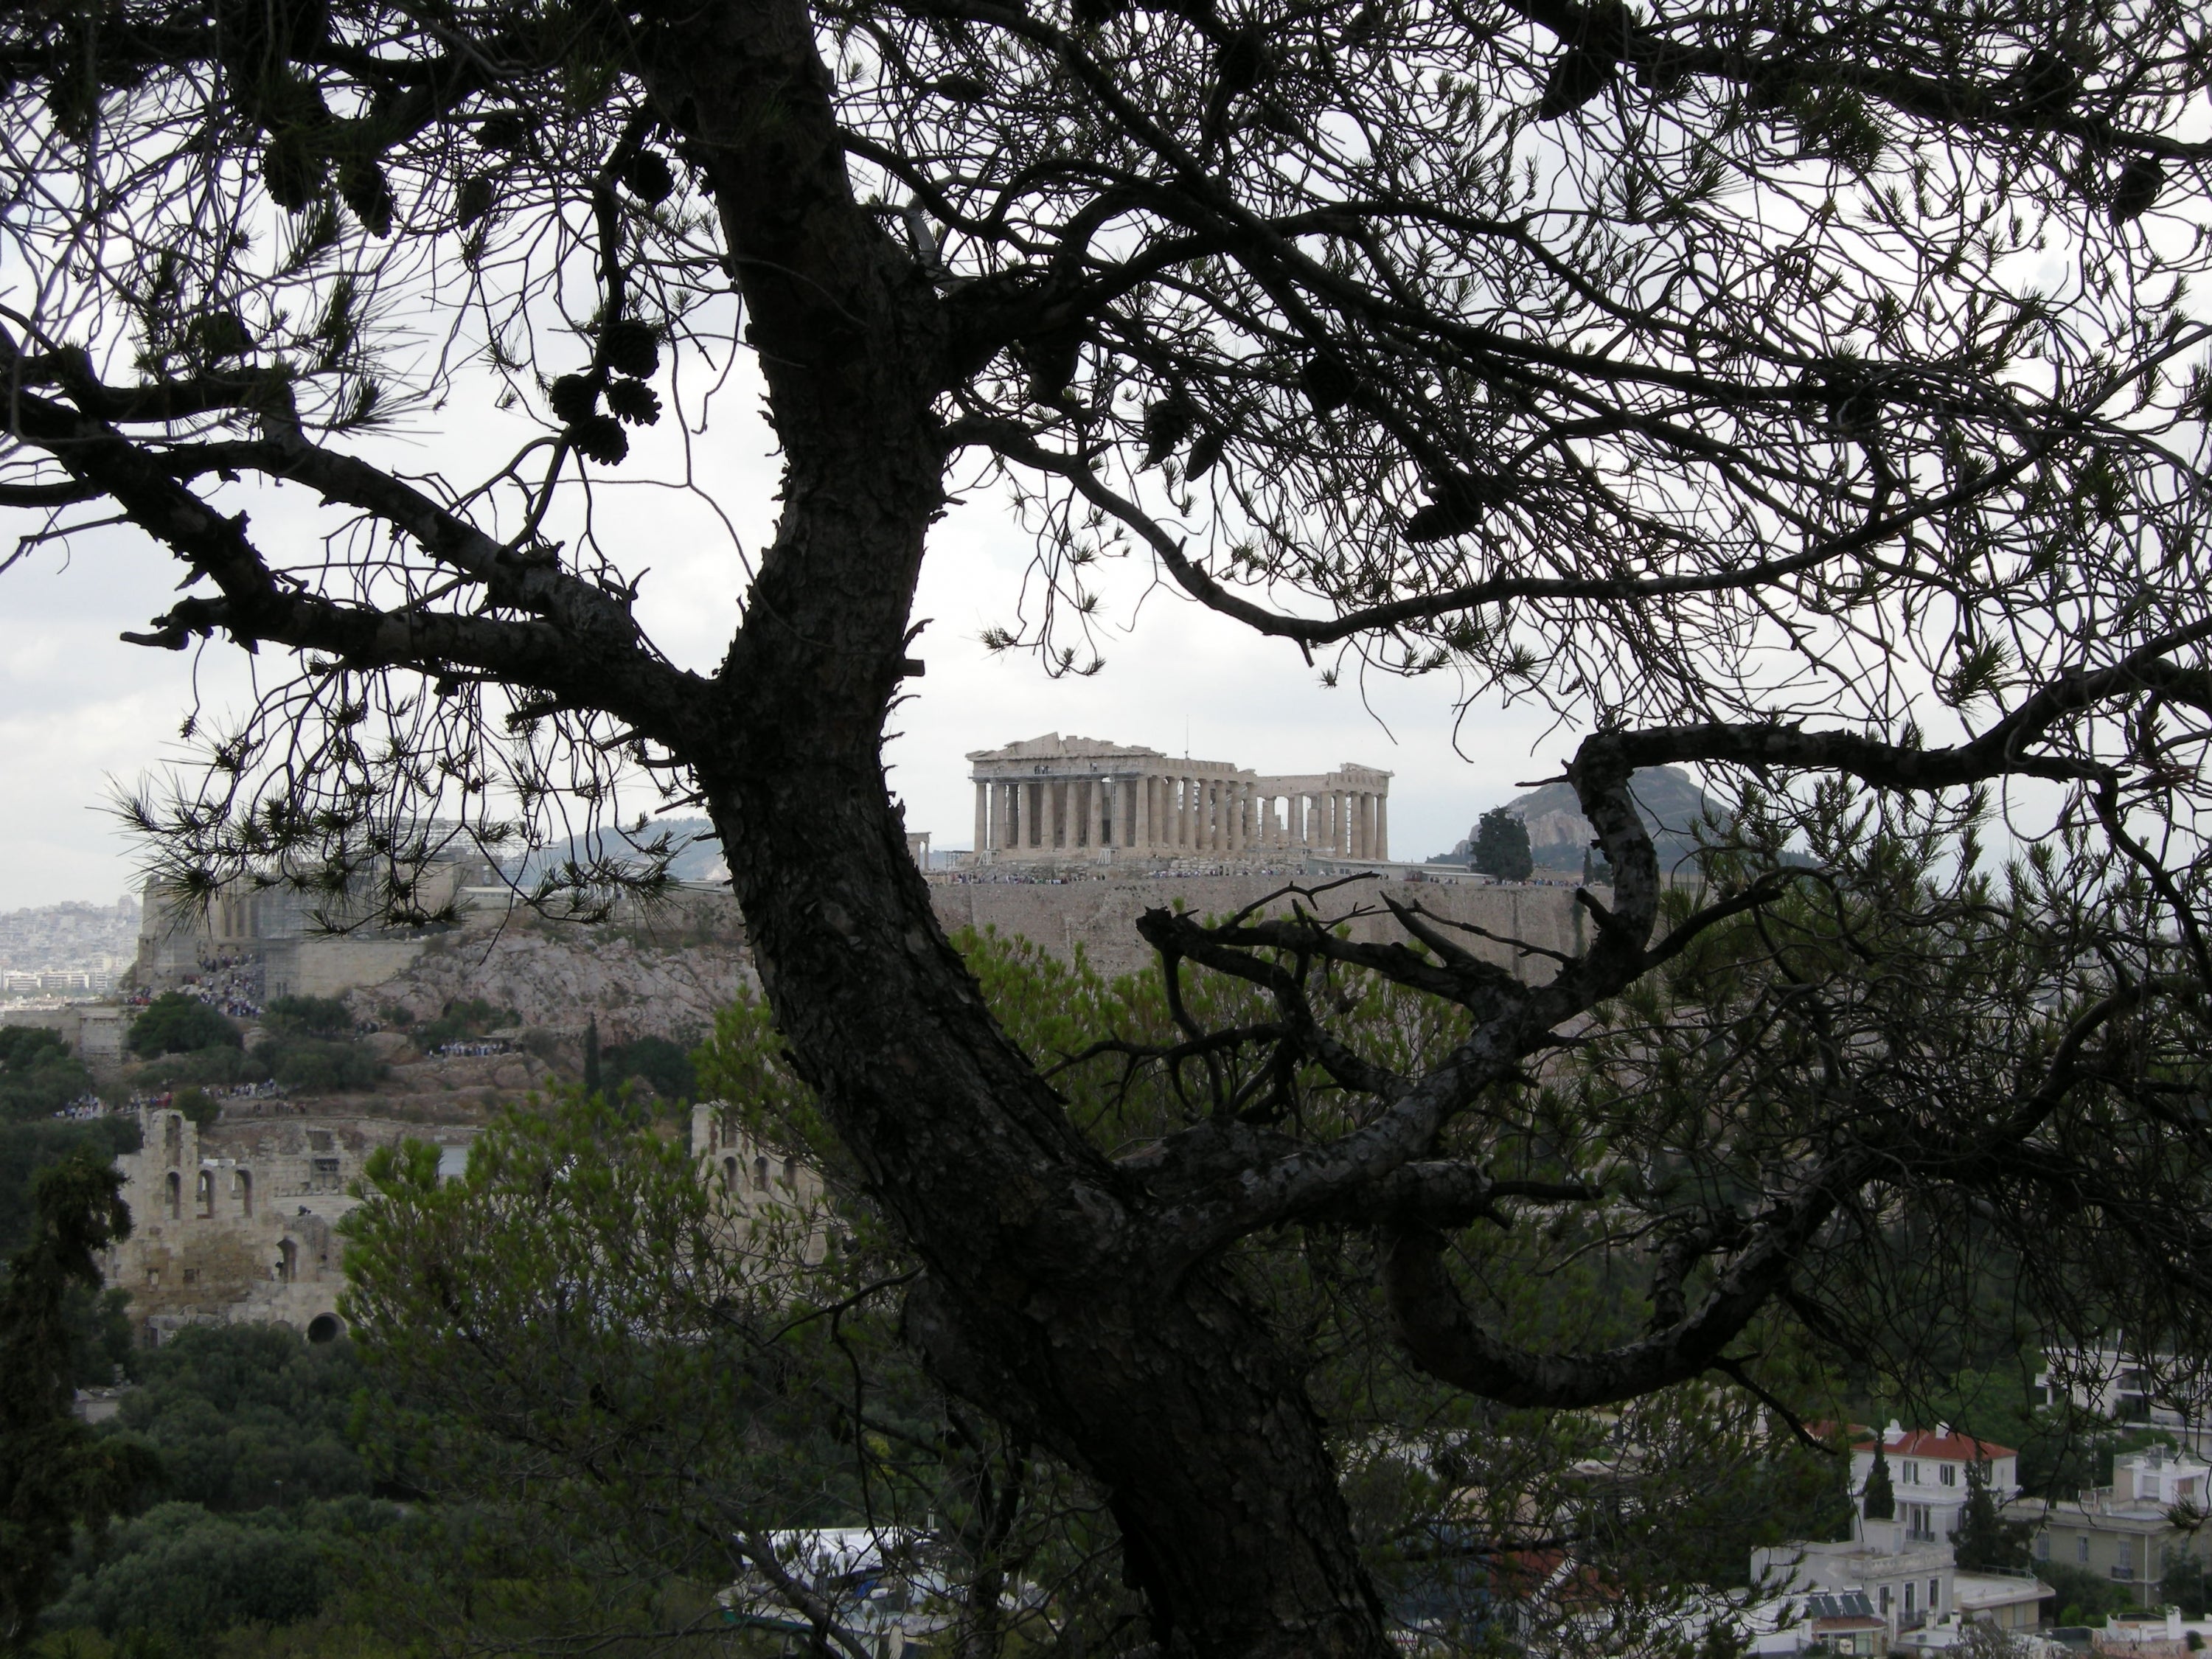 A view of the ruins of the Acropolis as seen from a distance behind a large tree. The photo is black and white, suggesting a mysterious or onimous mood.